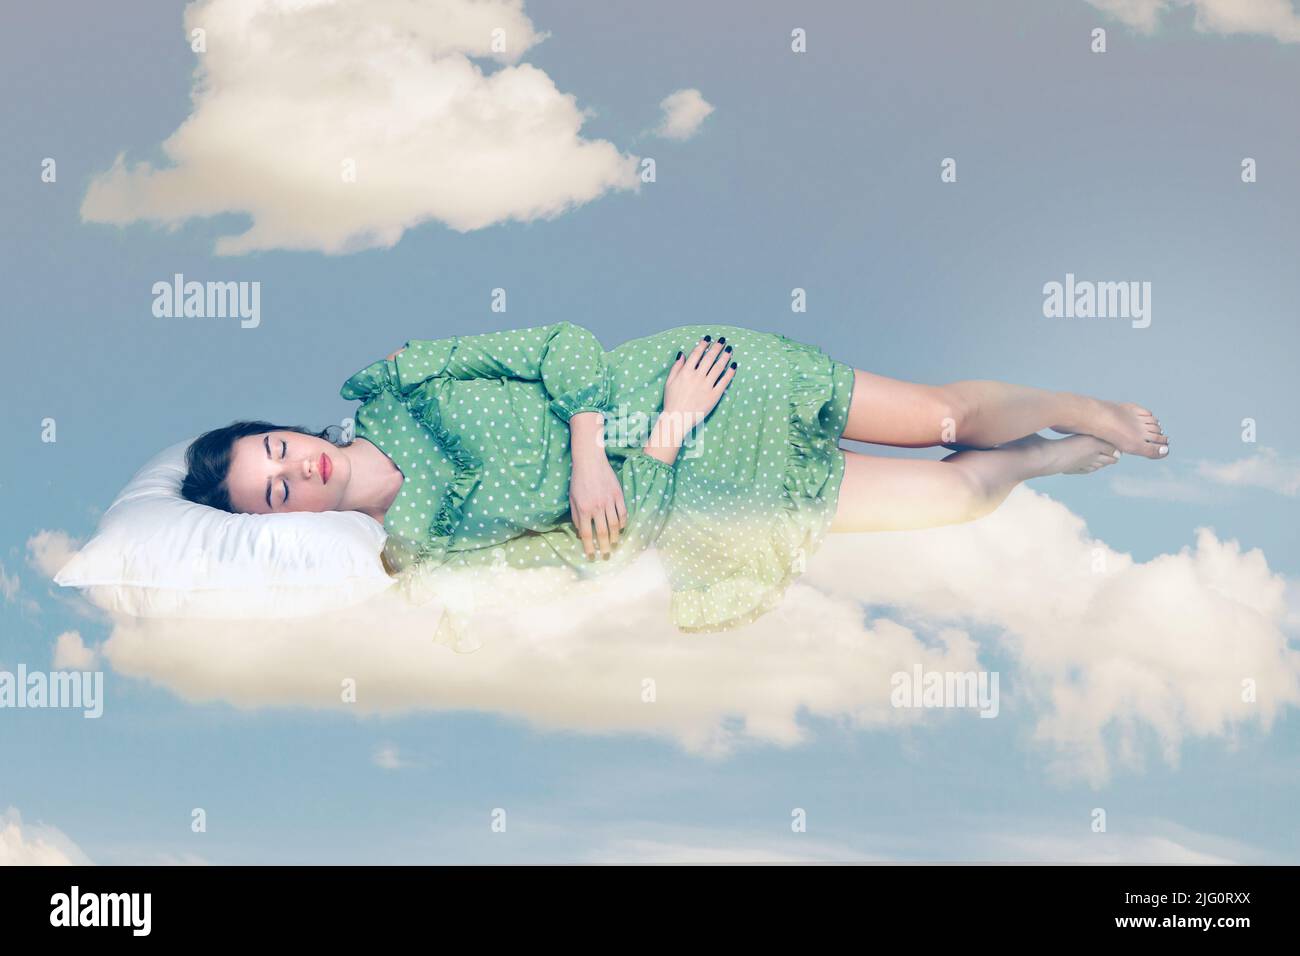 Sleeping beauty hovering in air. Relaxed girl in vintage ruffle dress lying comfortably on pillow levitating, keeping eyes closed watching dreams in the sky. collage composition on day cloudy blue sky Stock Photo